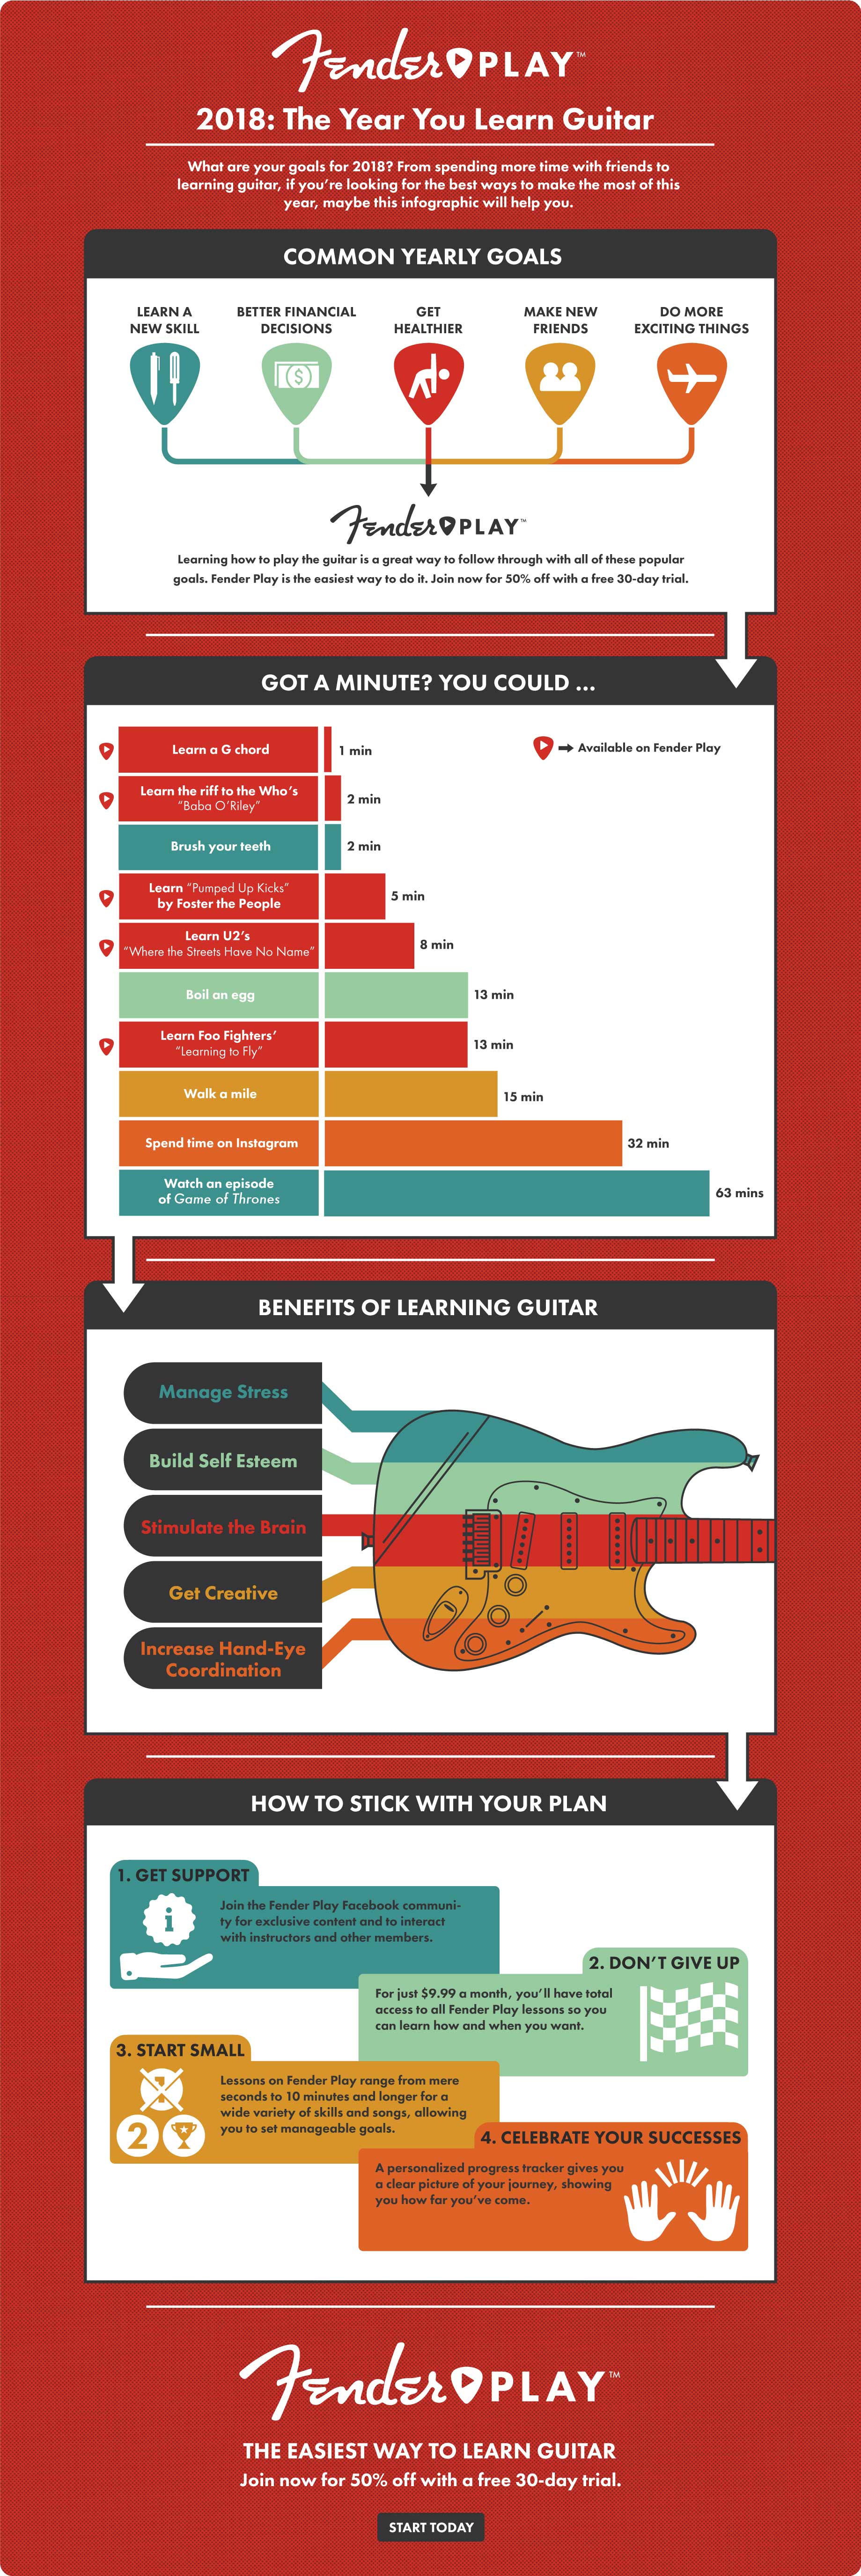 Benefits of Playing Guitar